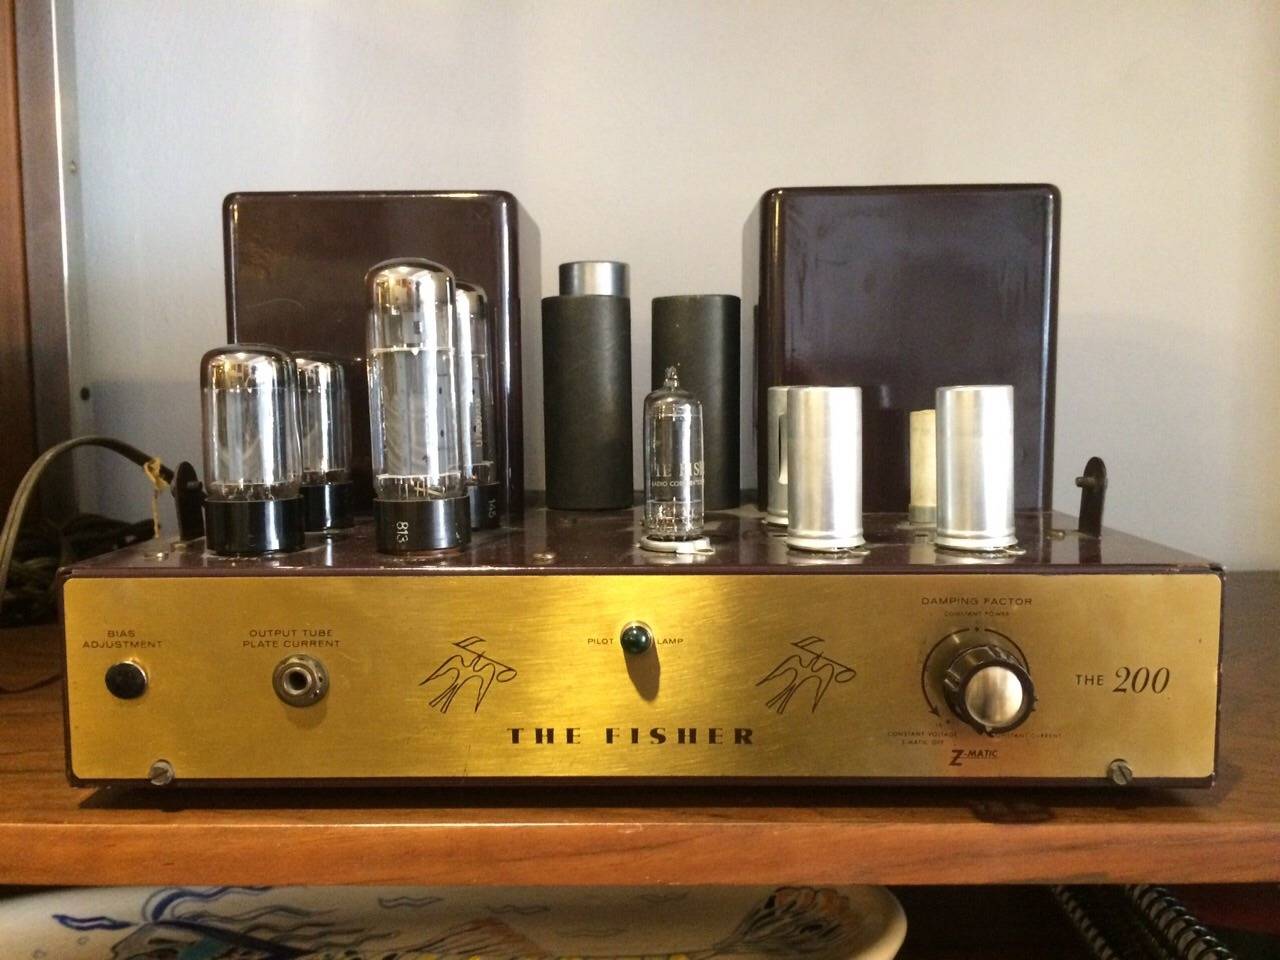 Pair of Tube Amplifiers by The Fisher. Excellent condition, they both work.